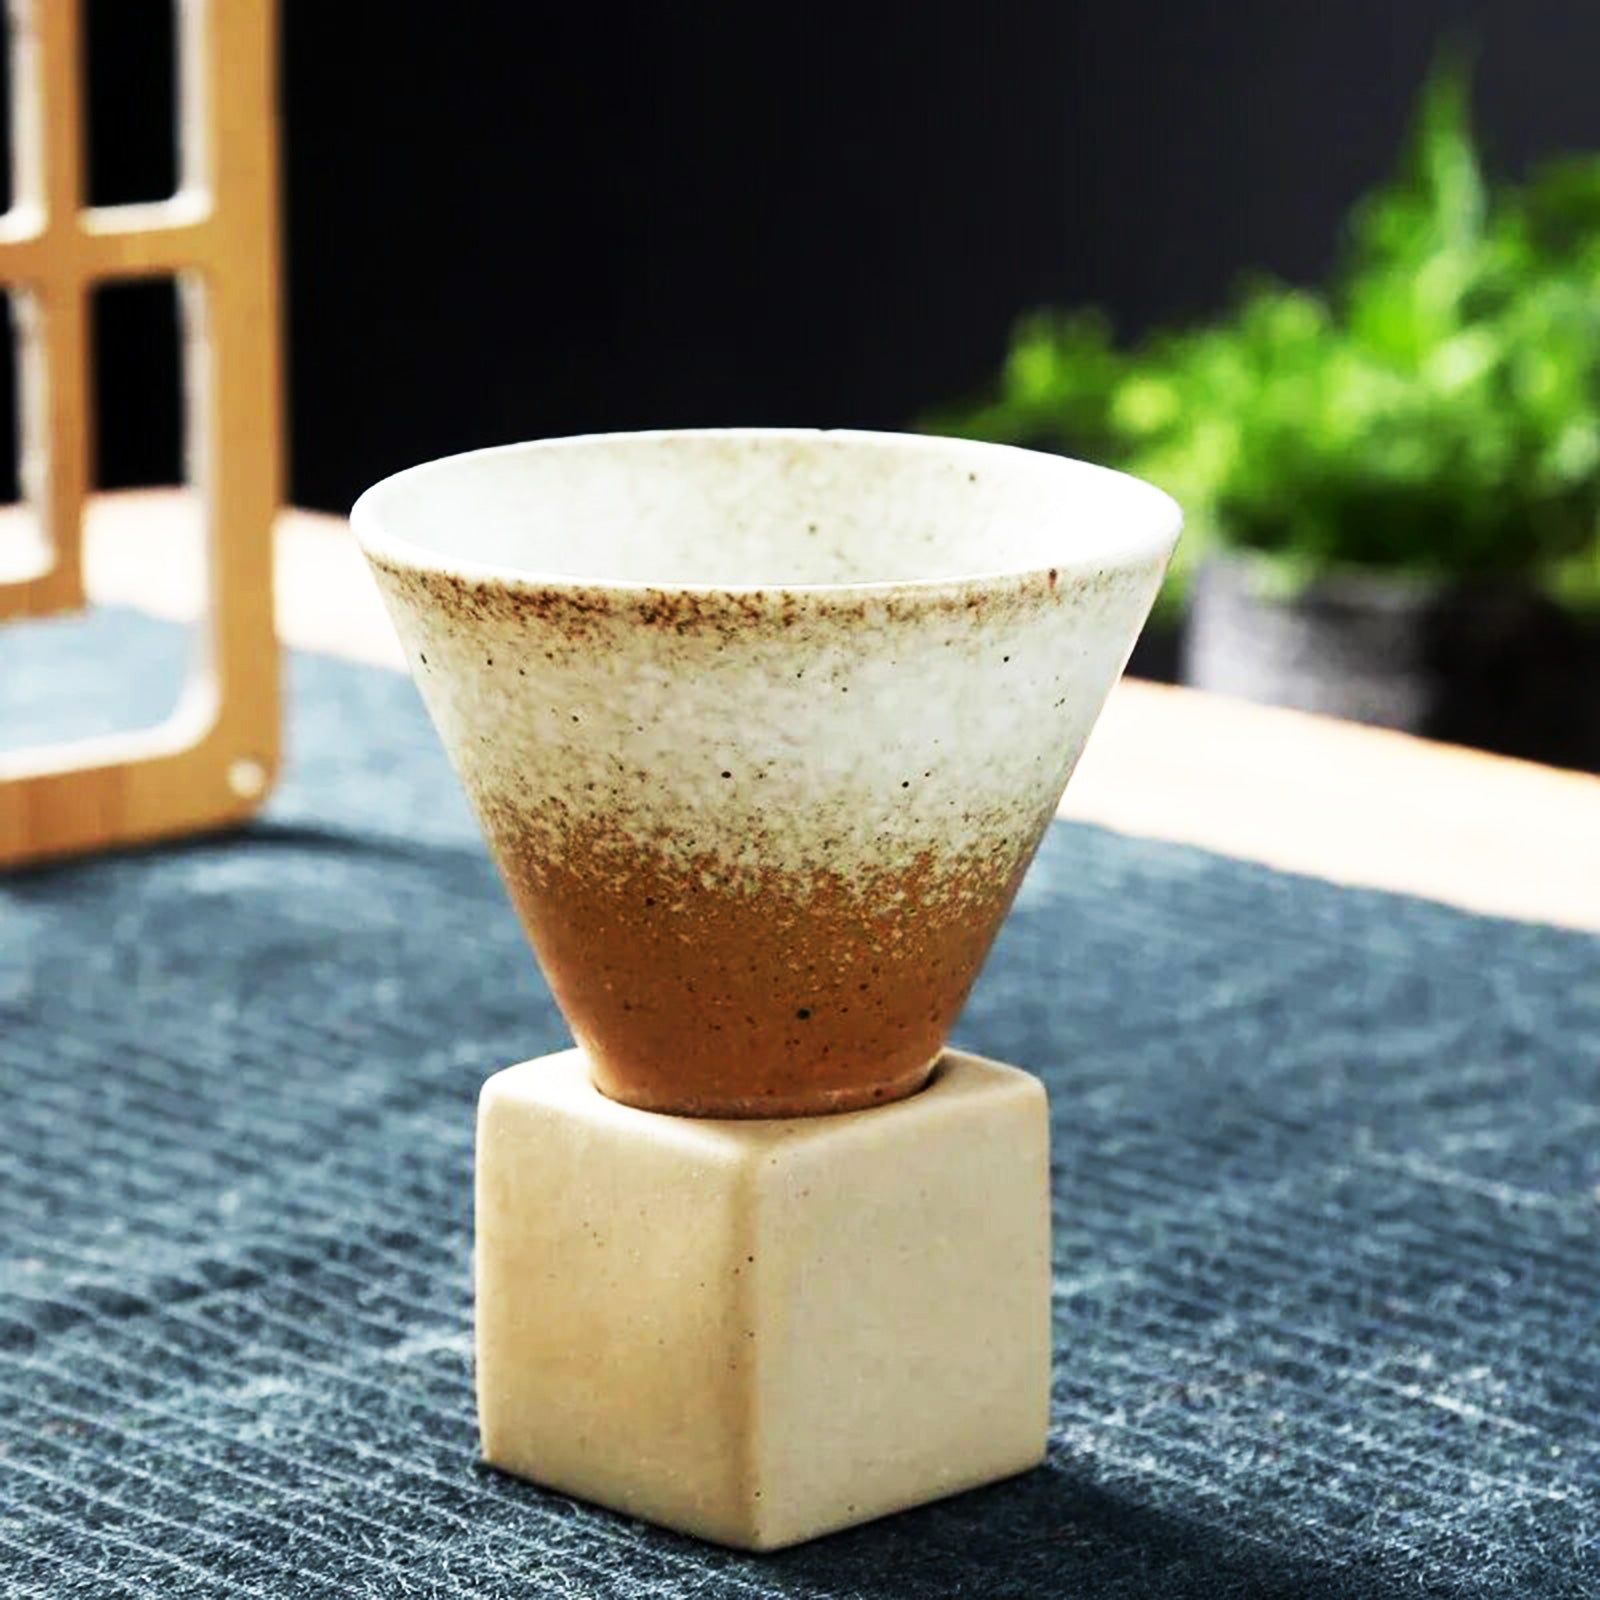 Cone-Shaped Cups: Add Some Fun to Your Drinks!